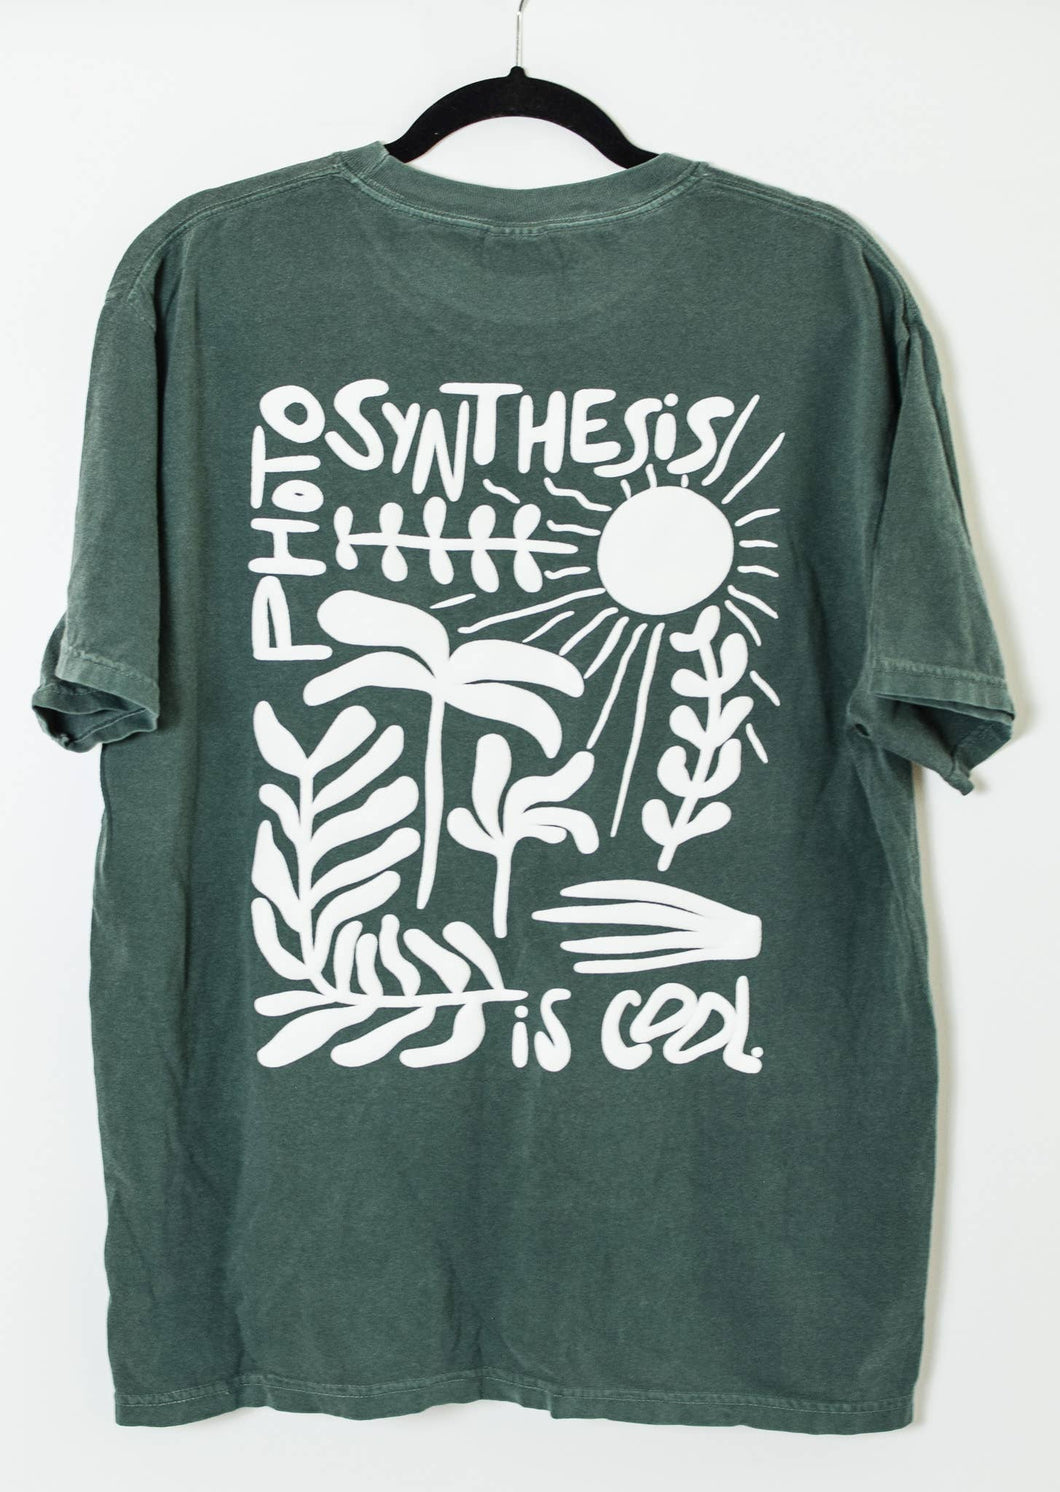 Photosynthesis Is Cool TShirt: XL